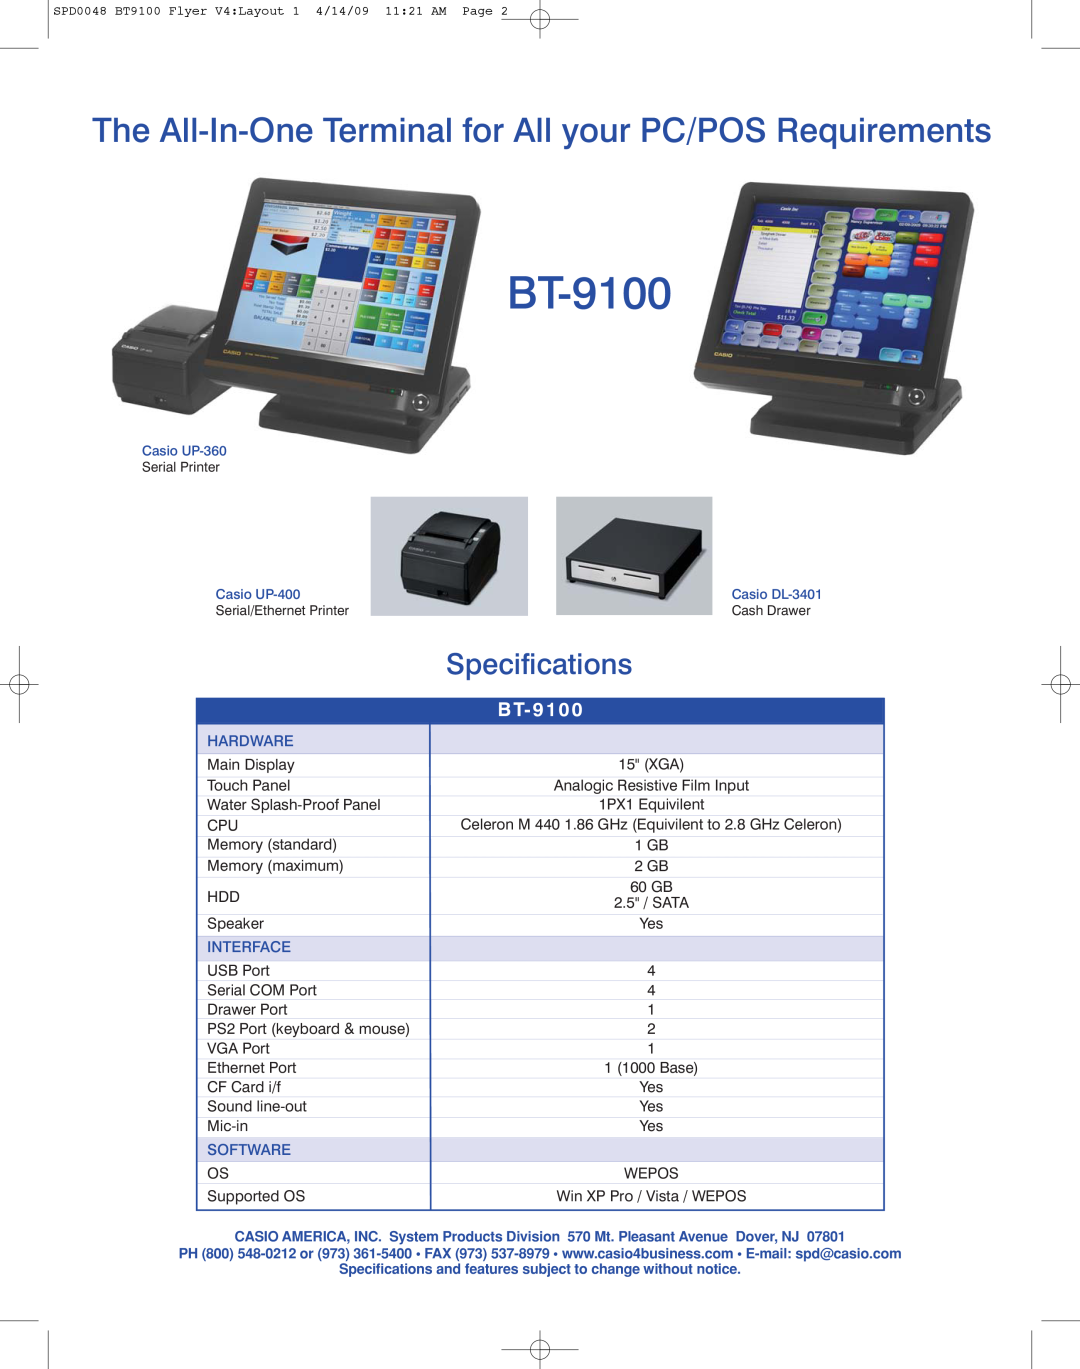 Casio BT-9100 The All-In-One Terminal for All your PC/POS Requirements, Specifications, B T- 9 1 0, Hardware, Interface 